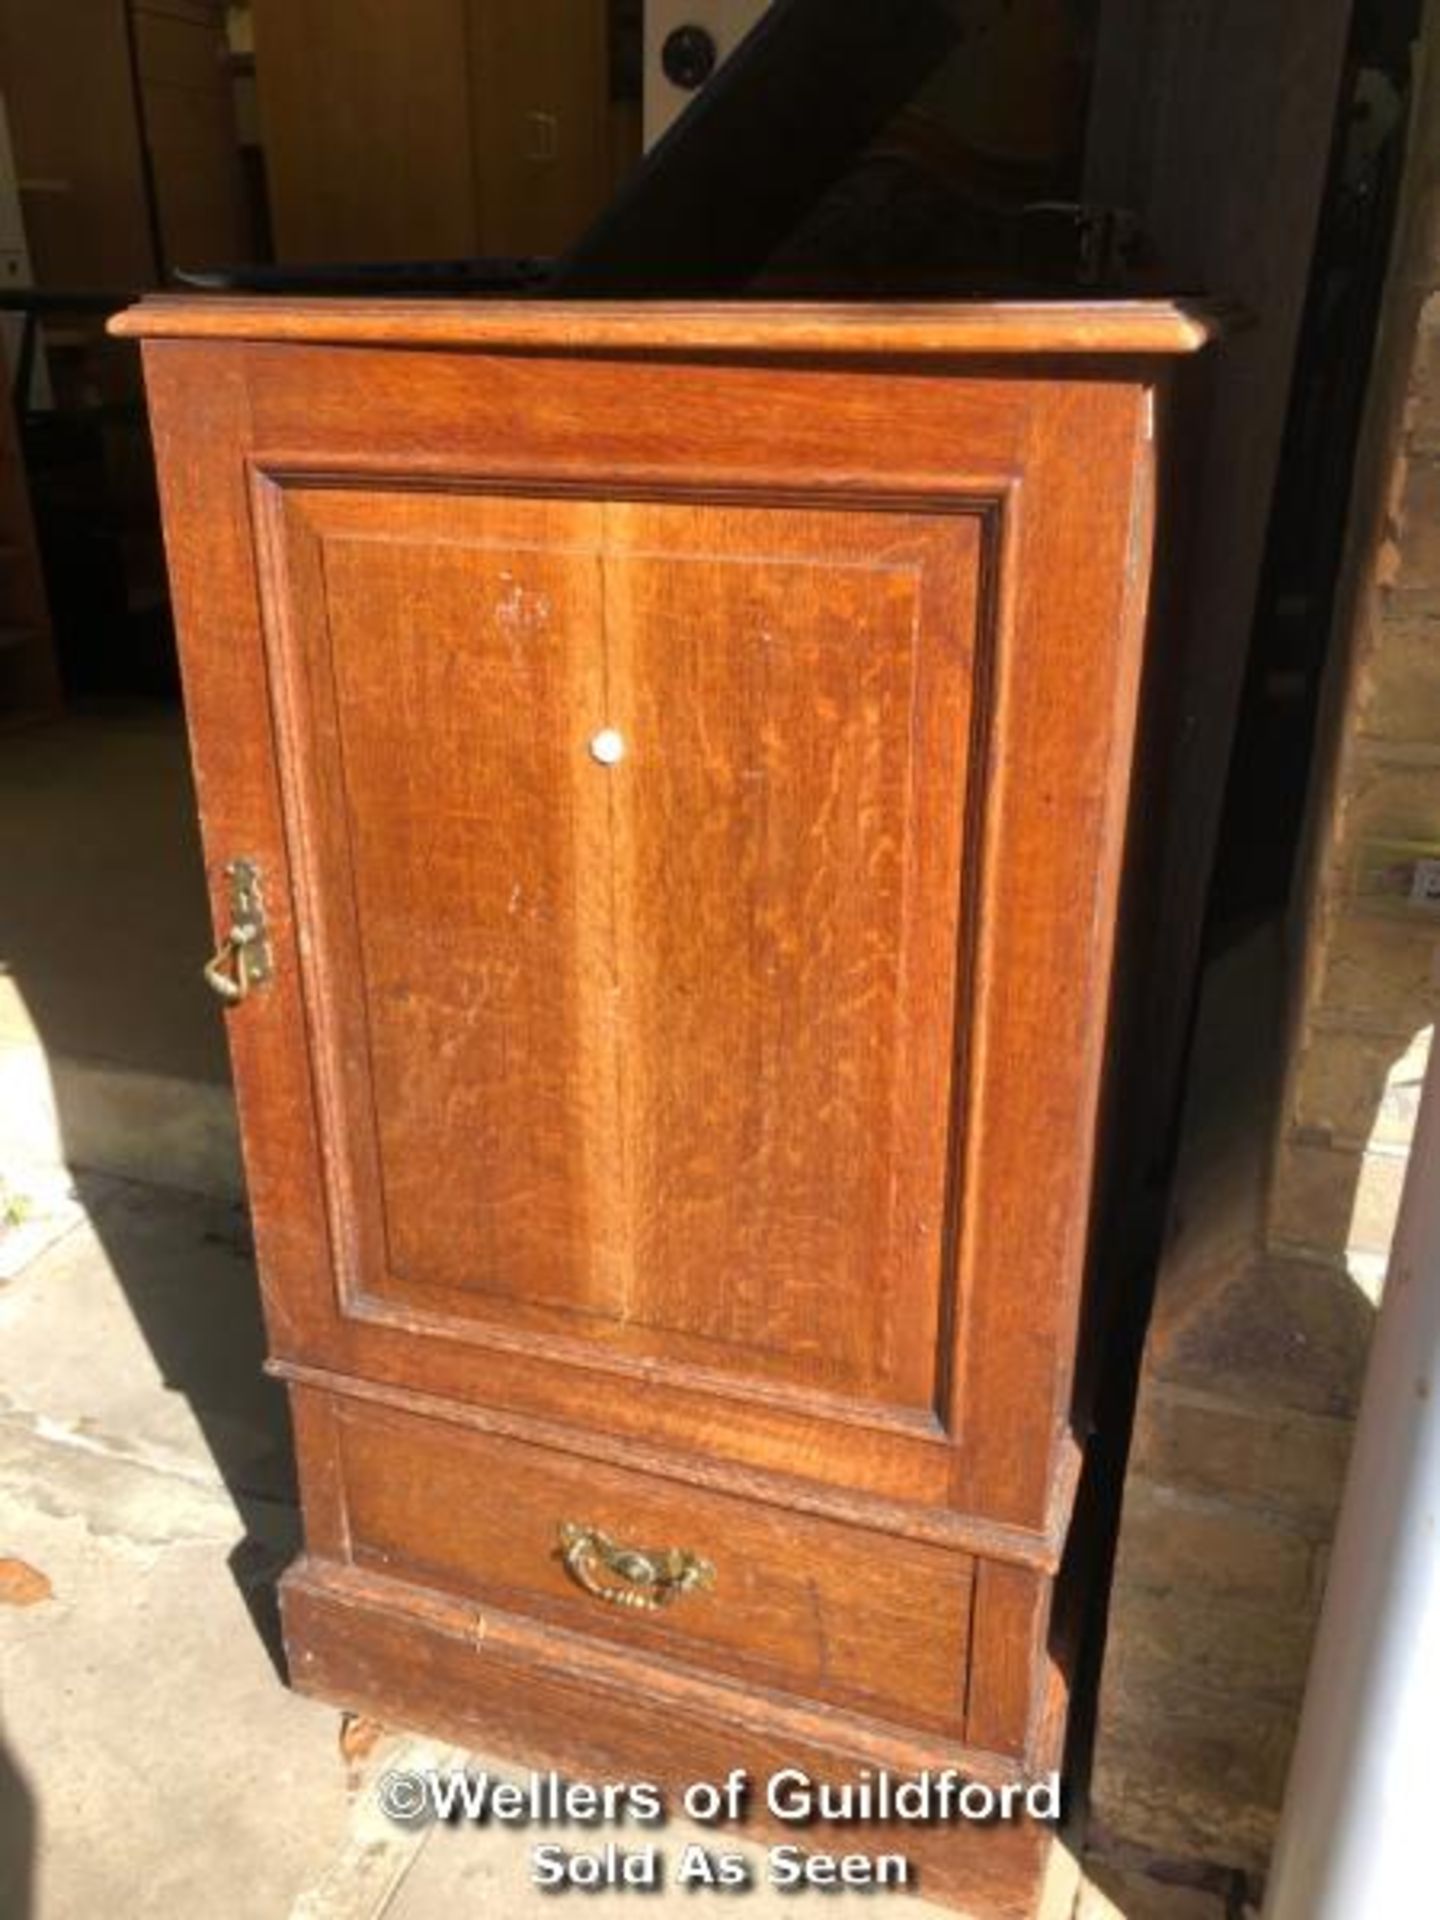 *GEORGE COOPERS LONDON RELIABLE SAFE WITH INTERNAL DRAWER AND KEY HIDDEN WITHIN CABINET - SAFE - Image 4 of 4